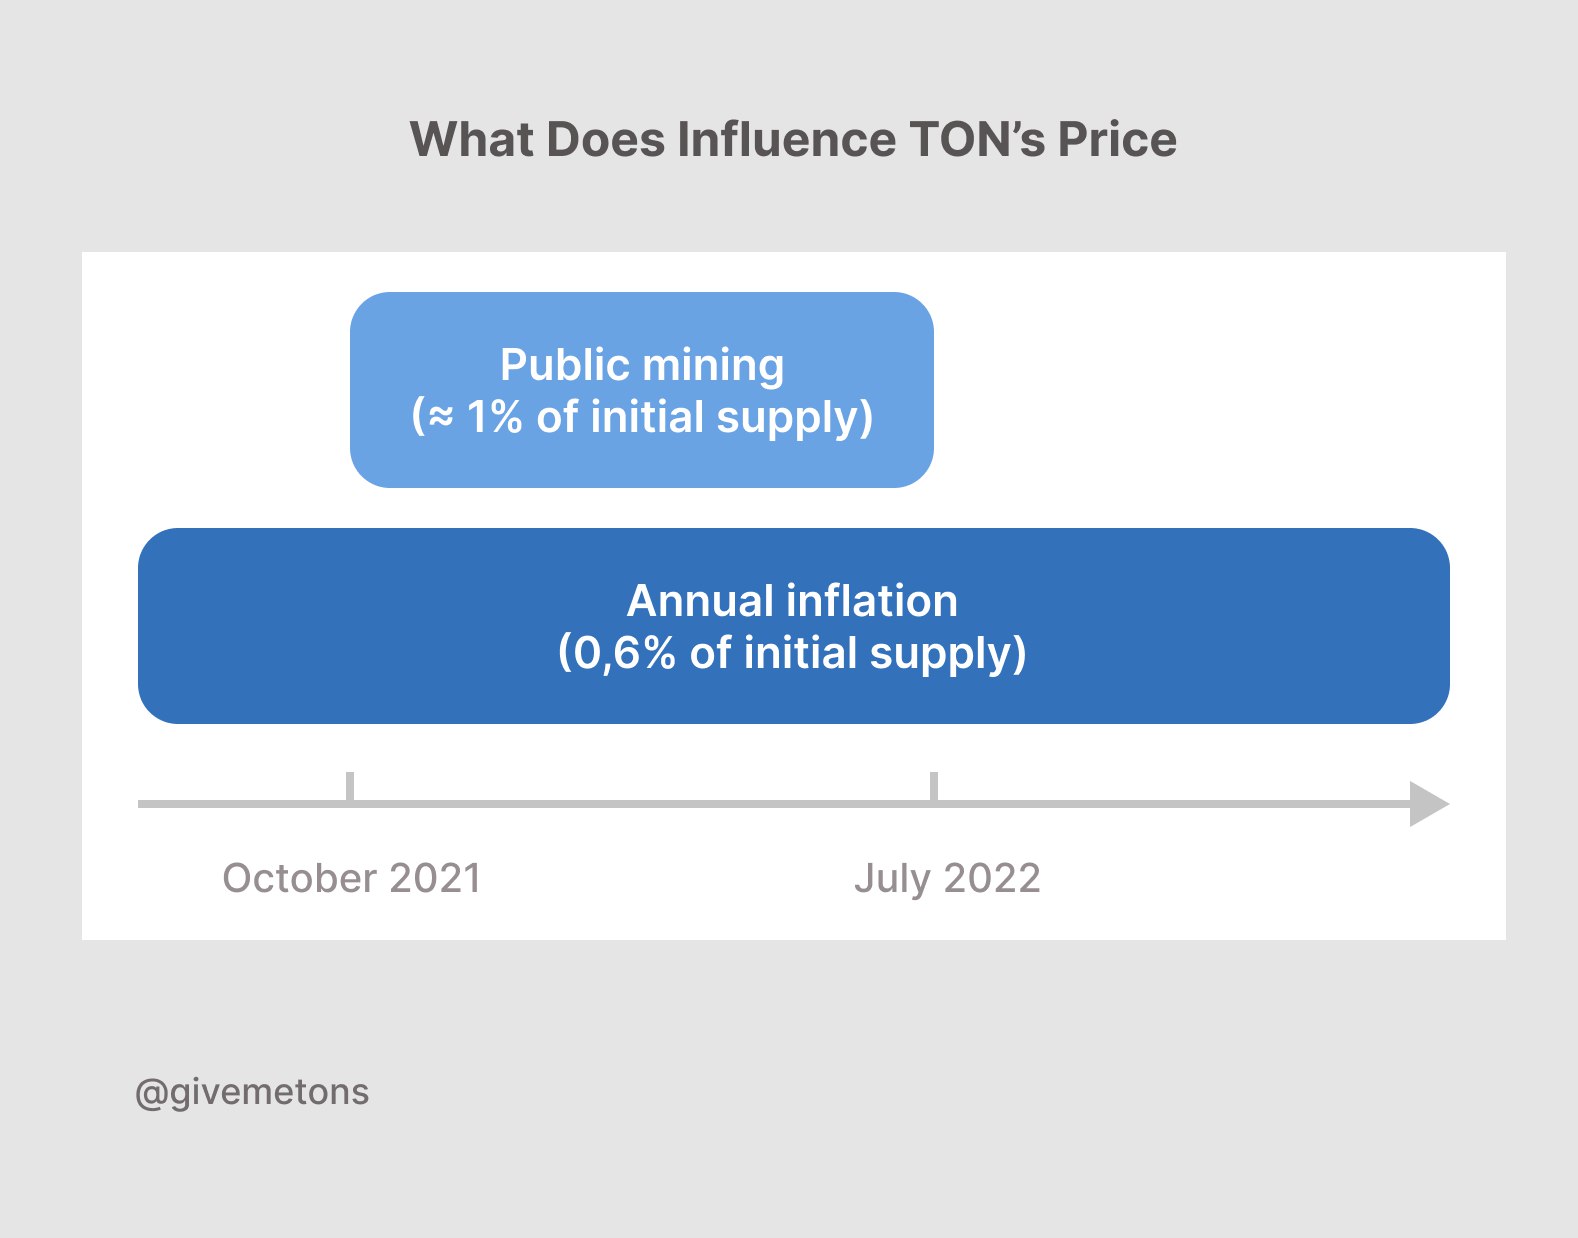 What Does Influence TON’s Price